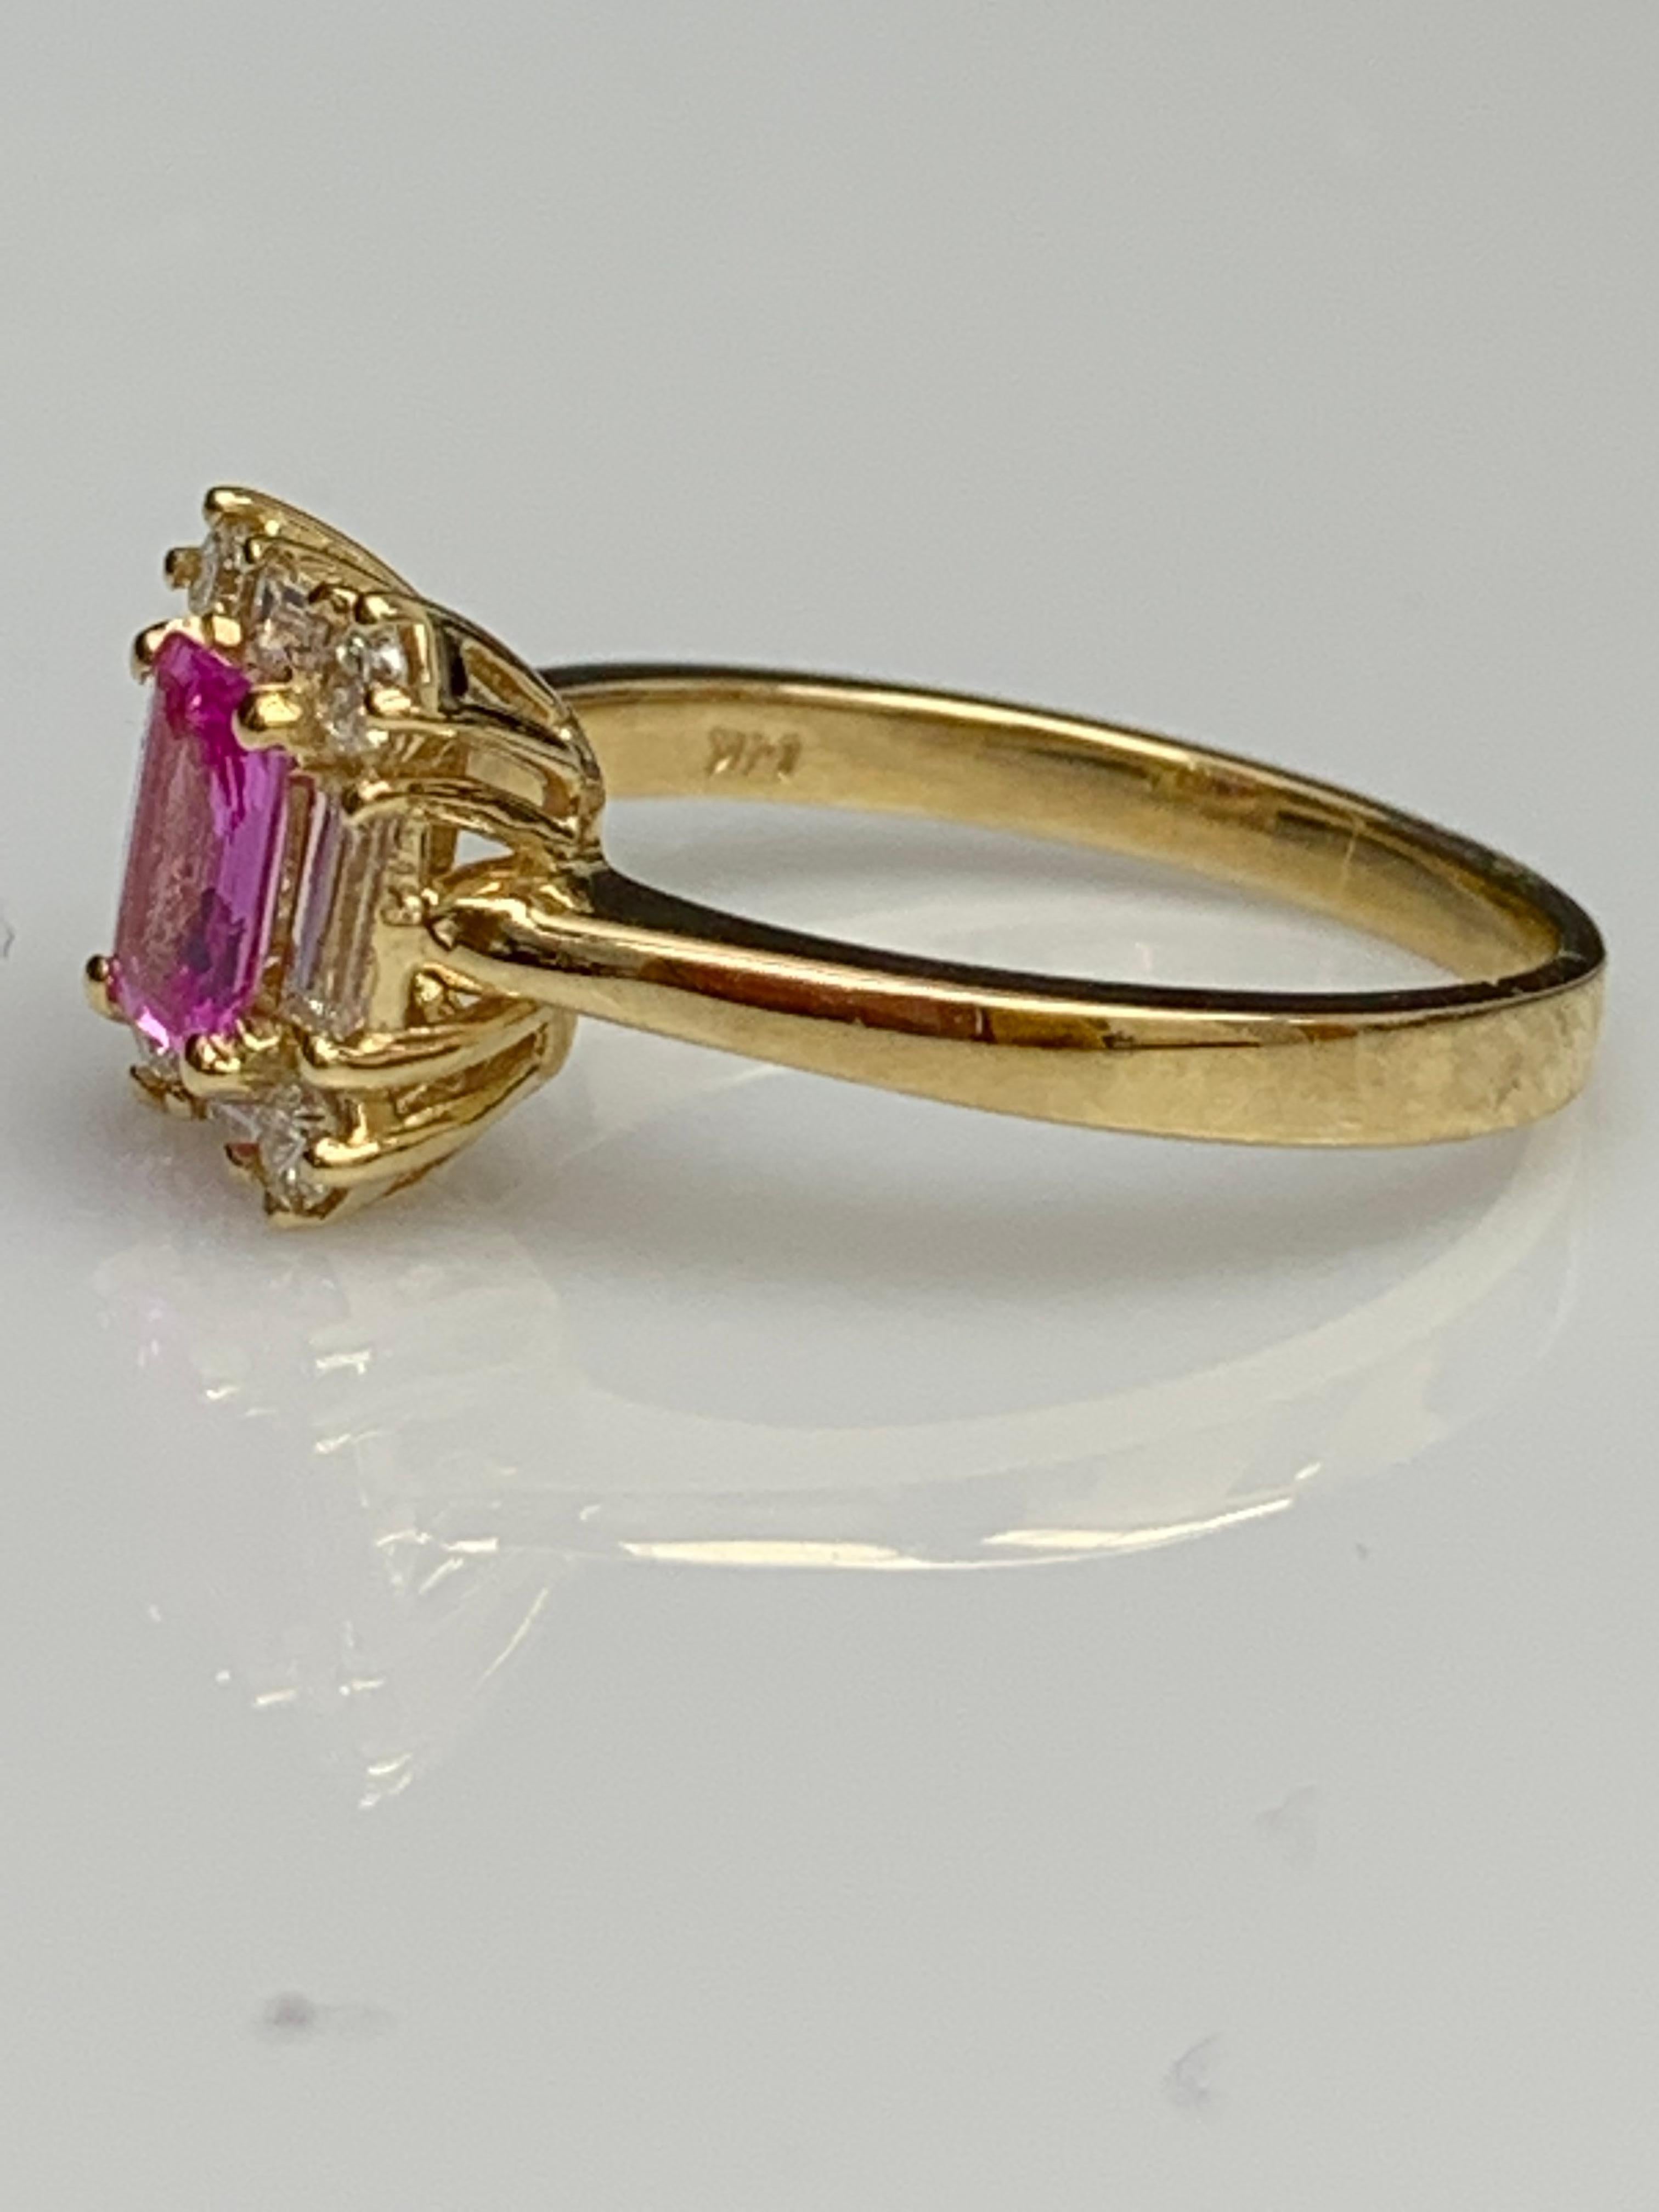 0.55 Carat Emerald Cut Pink Sapphire and Diamond Ring 14K Yellow Gold For Sale 6